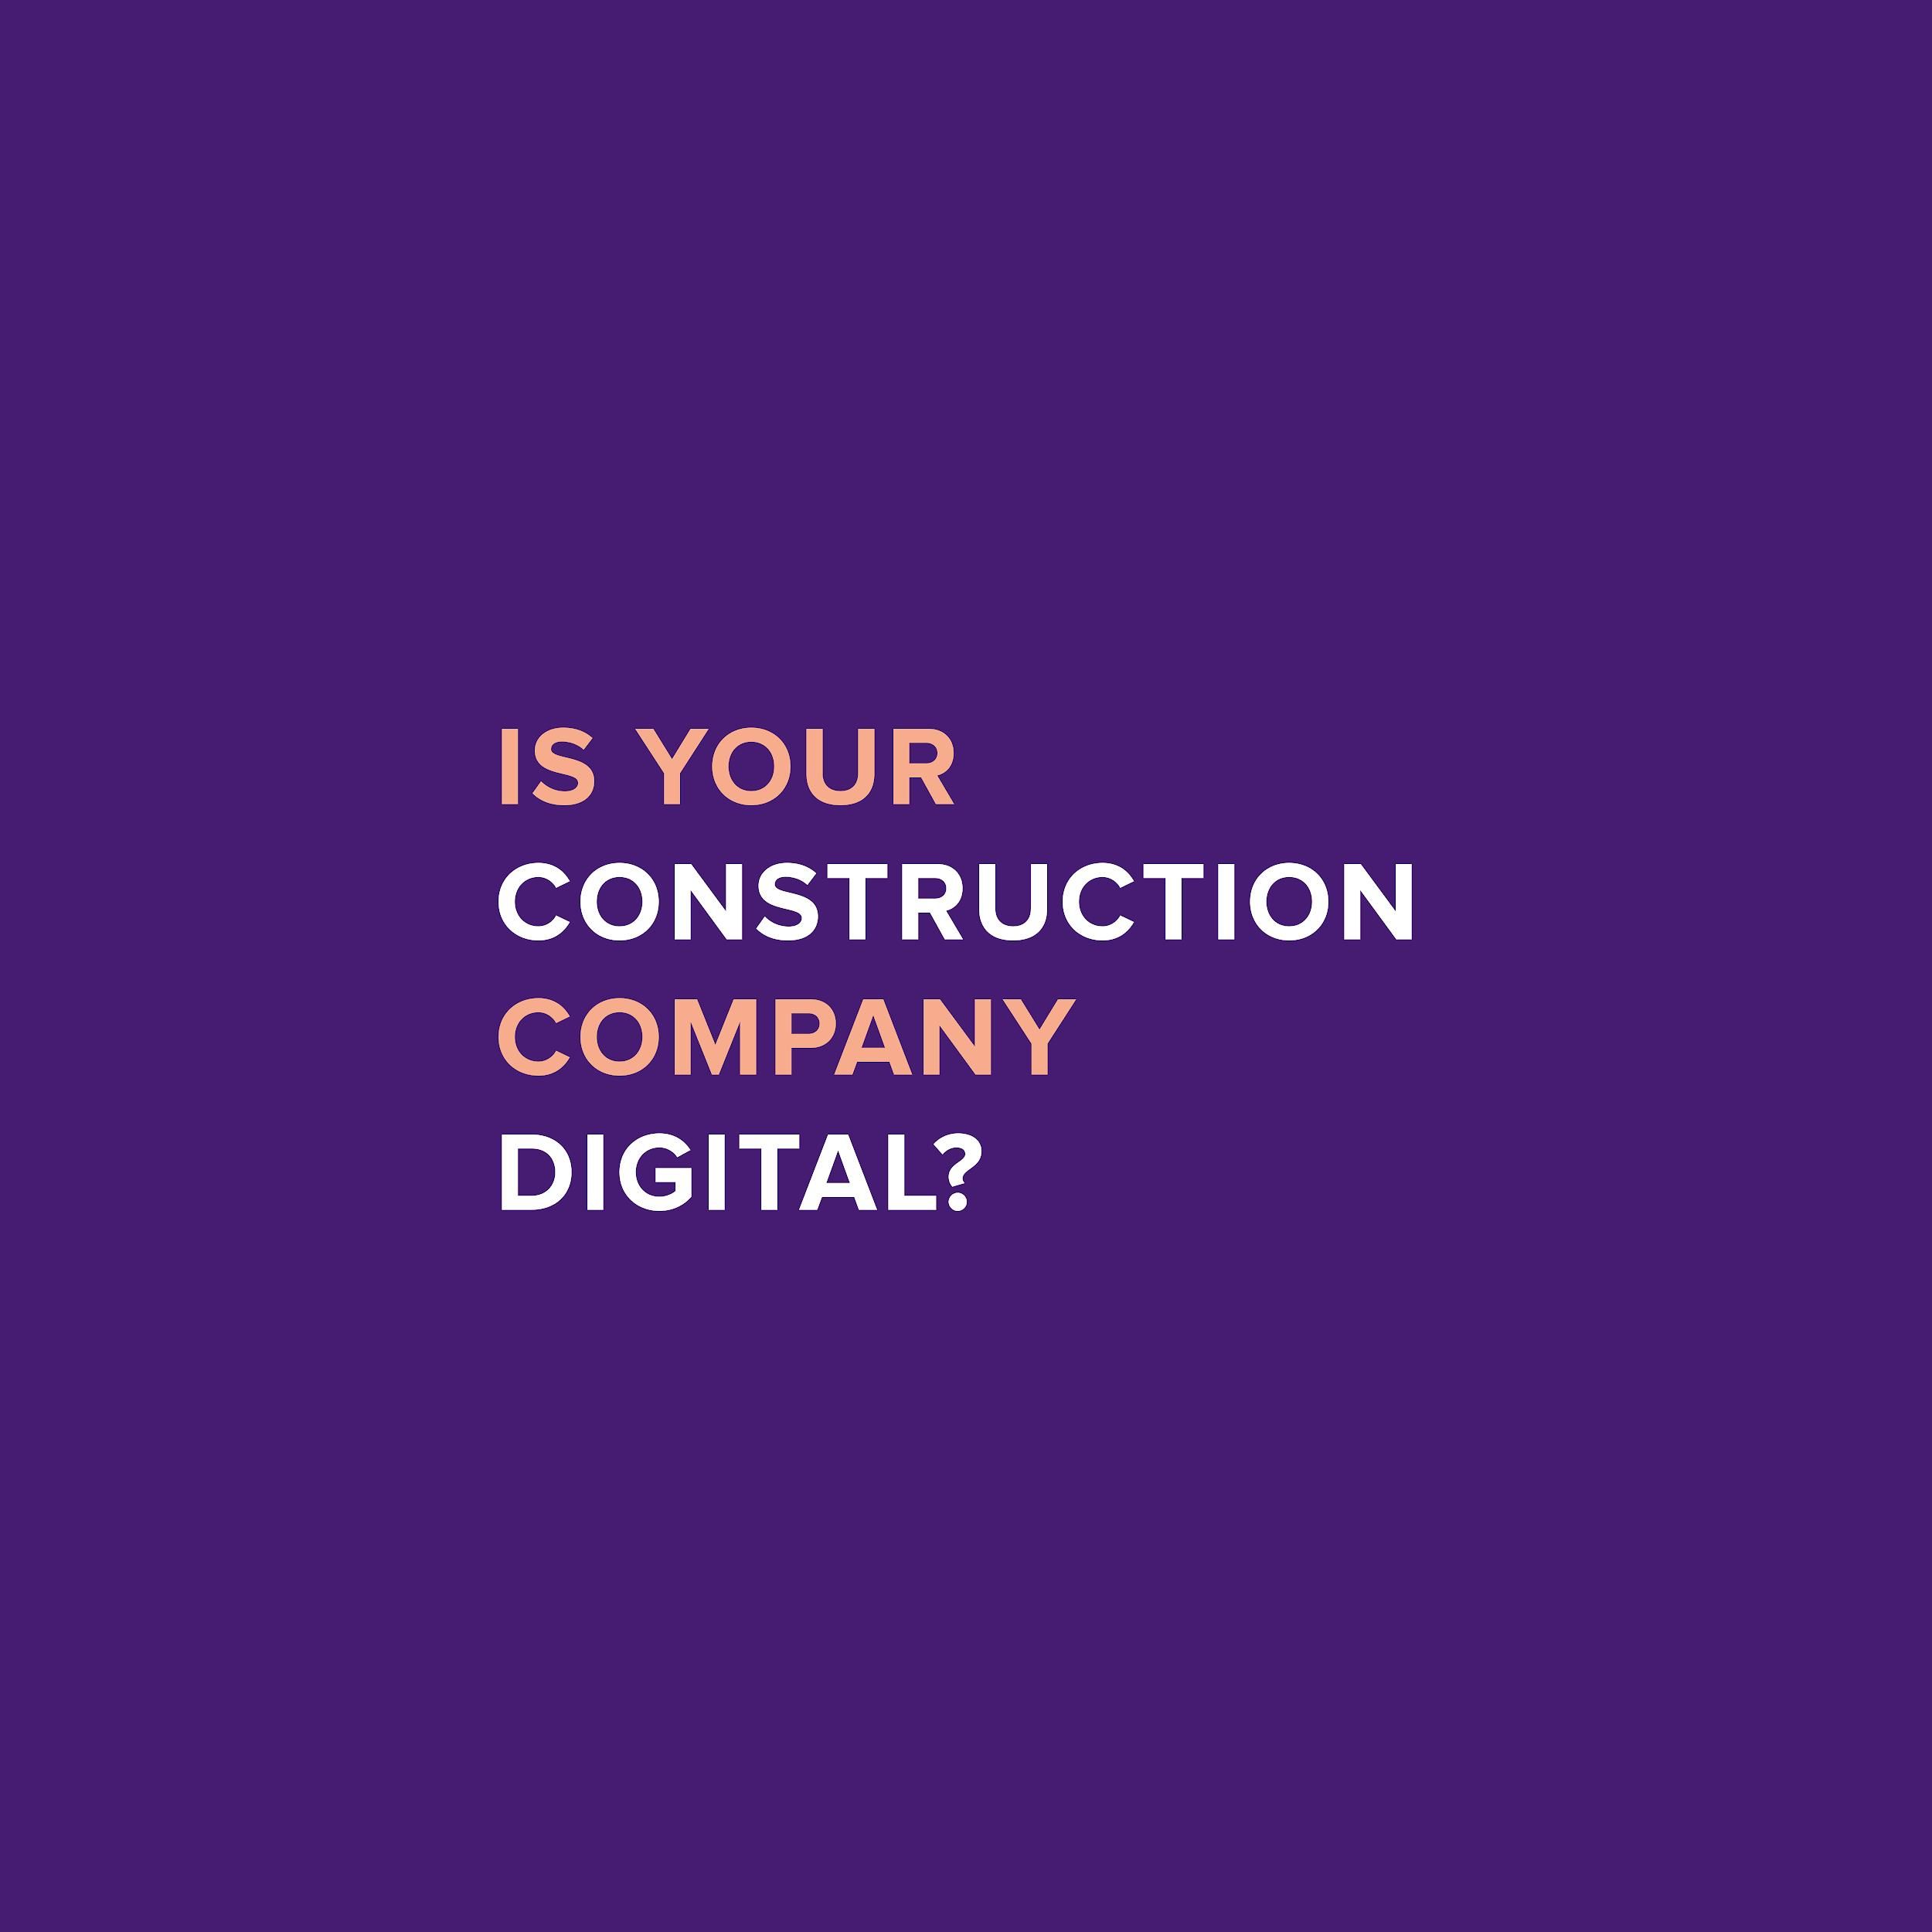 By how many percent is your company digitalized?